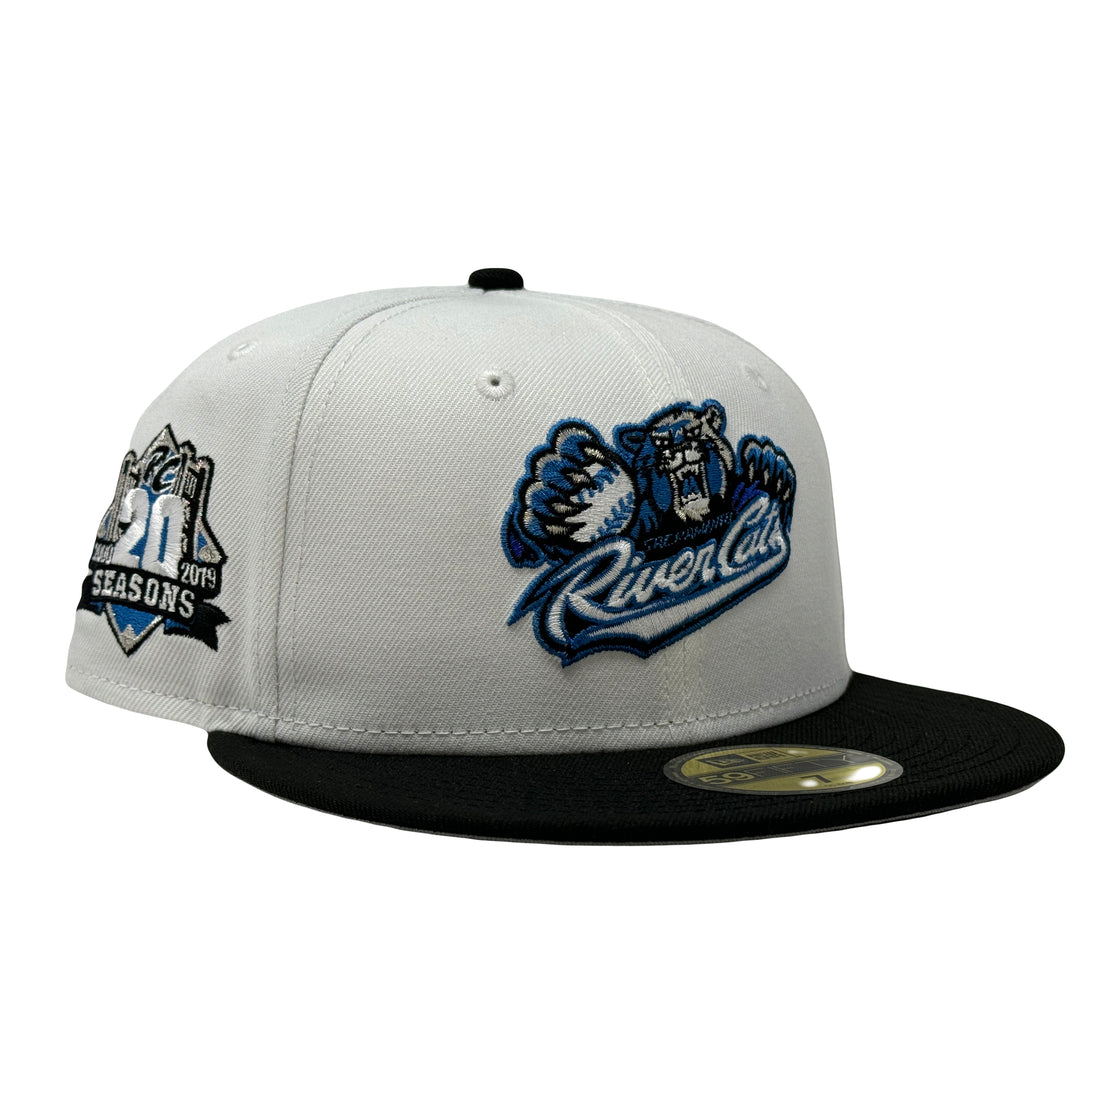 Sacramento River Cats 20th Anniversary 59Fifty New Era Fitted Hat